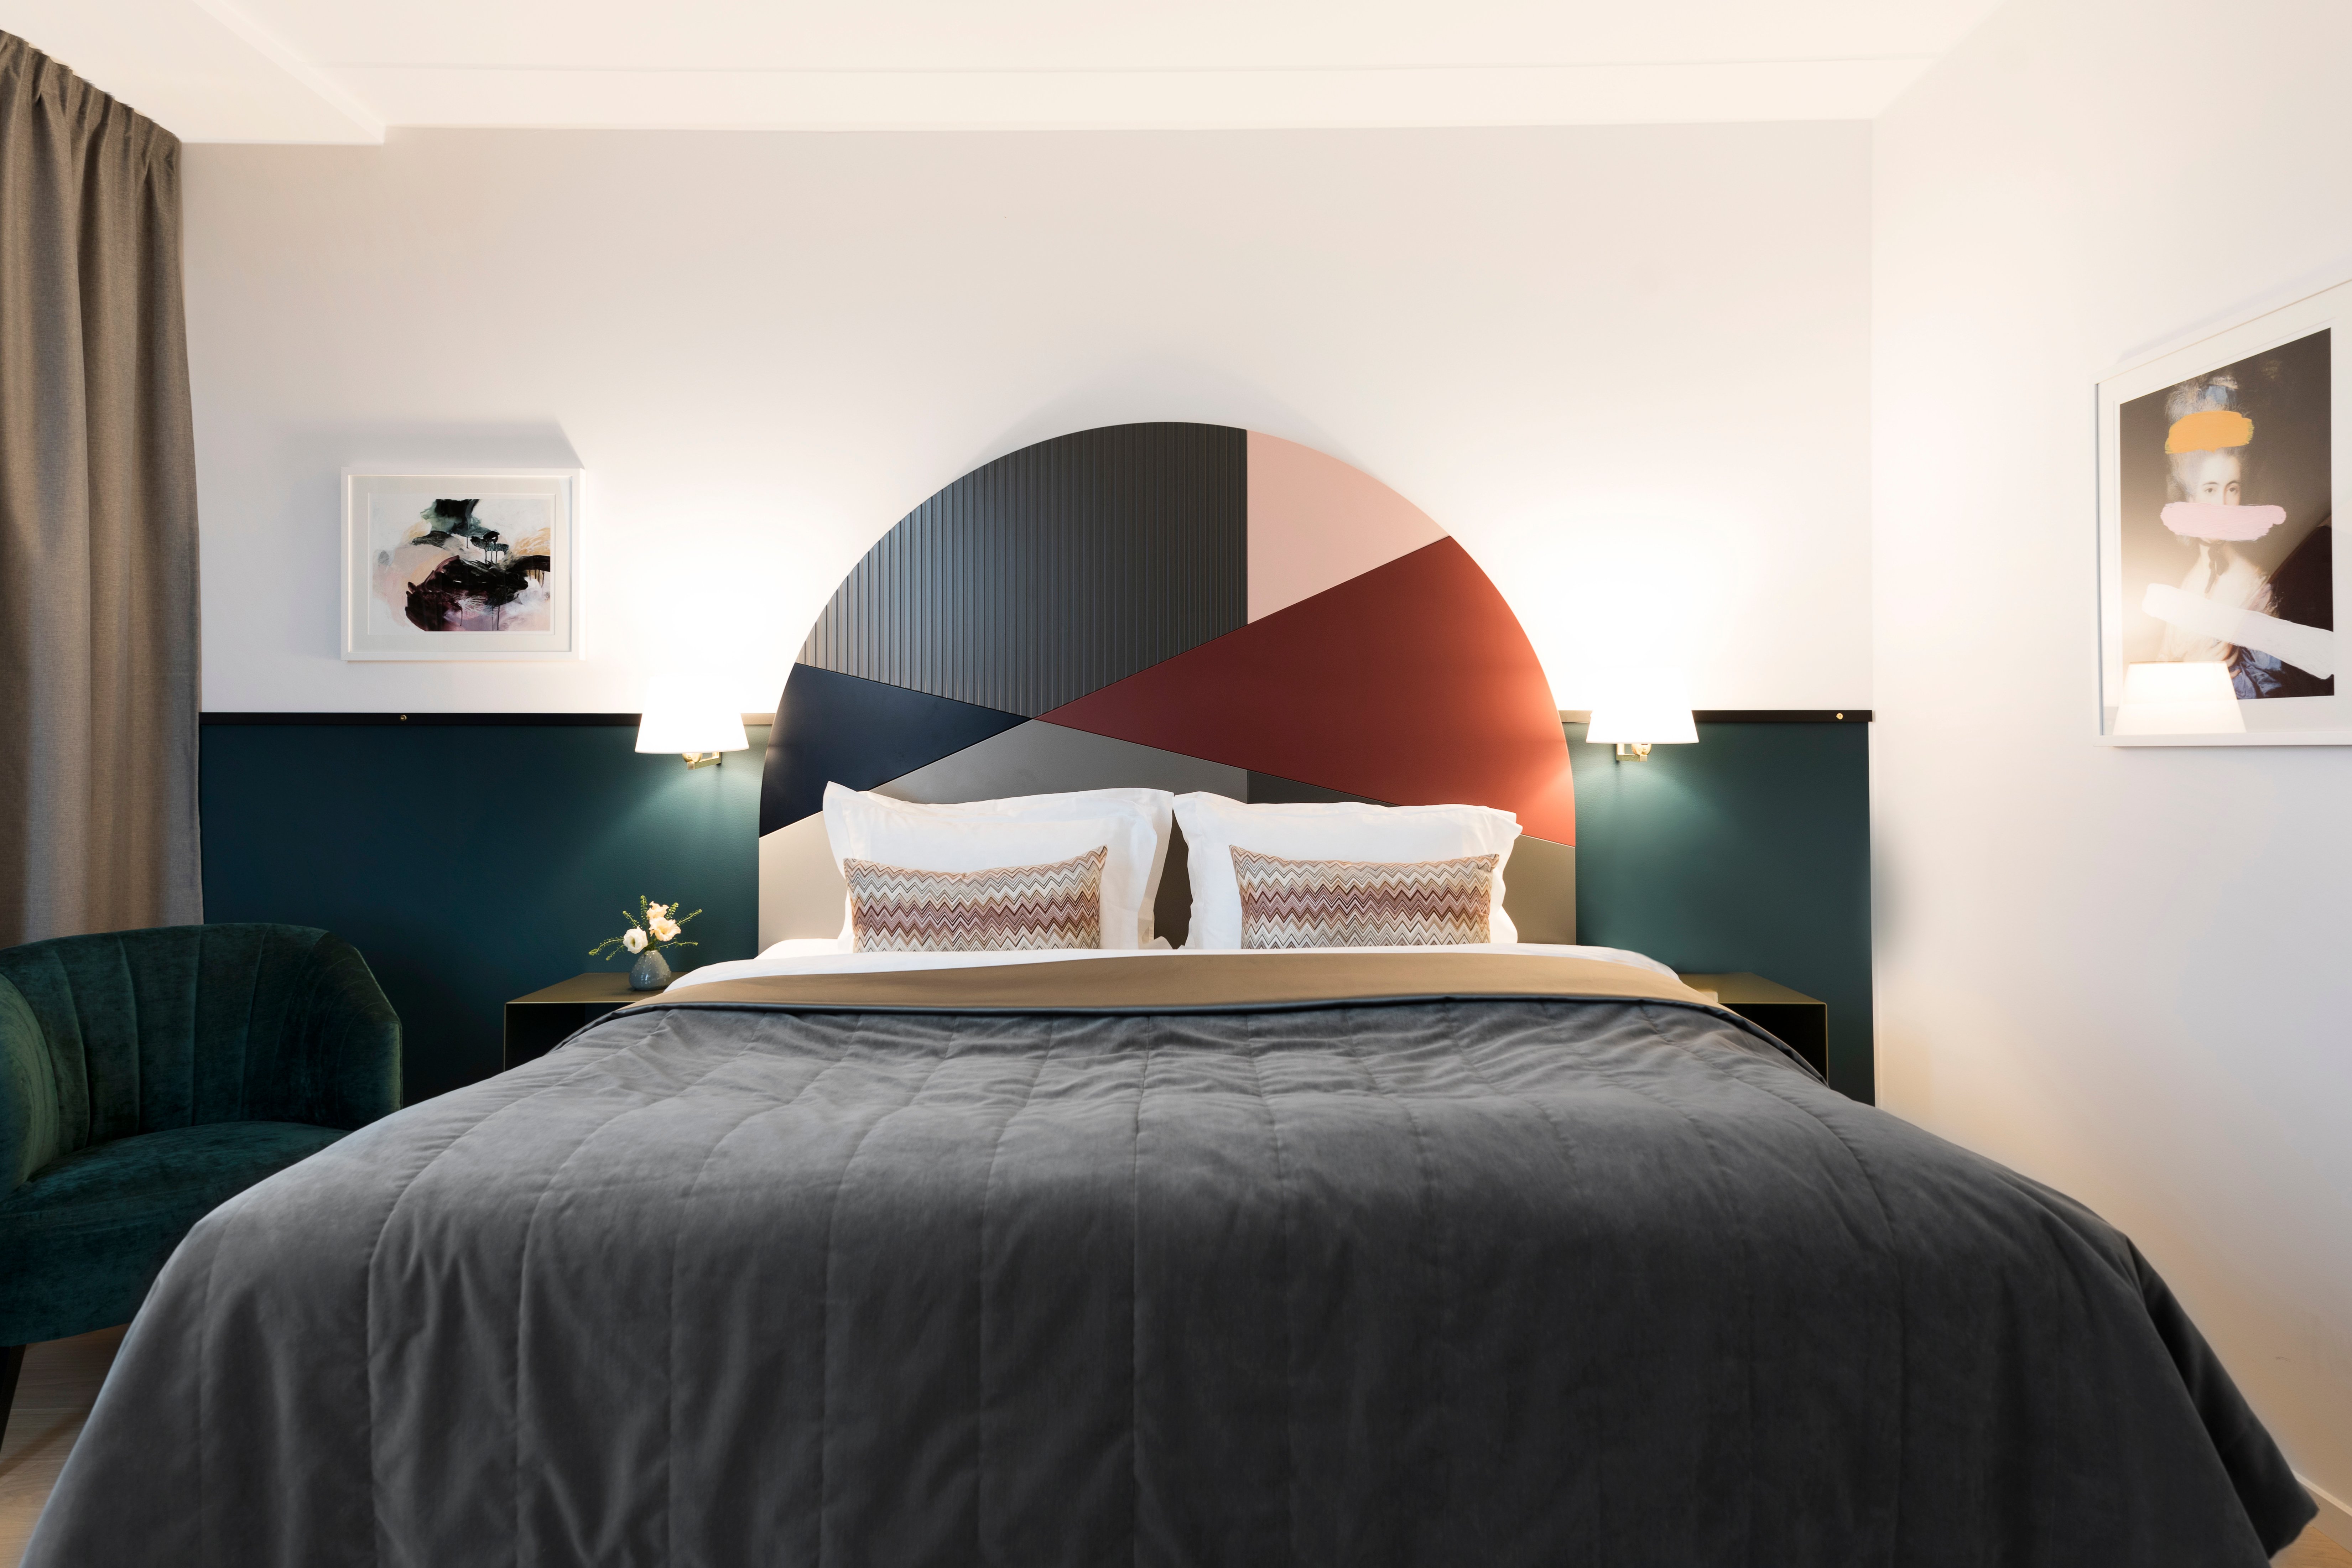 Bright hotel room with bed, colorful headboard and bedside lamps